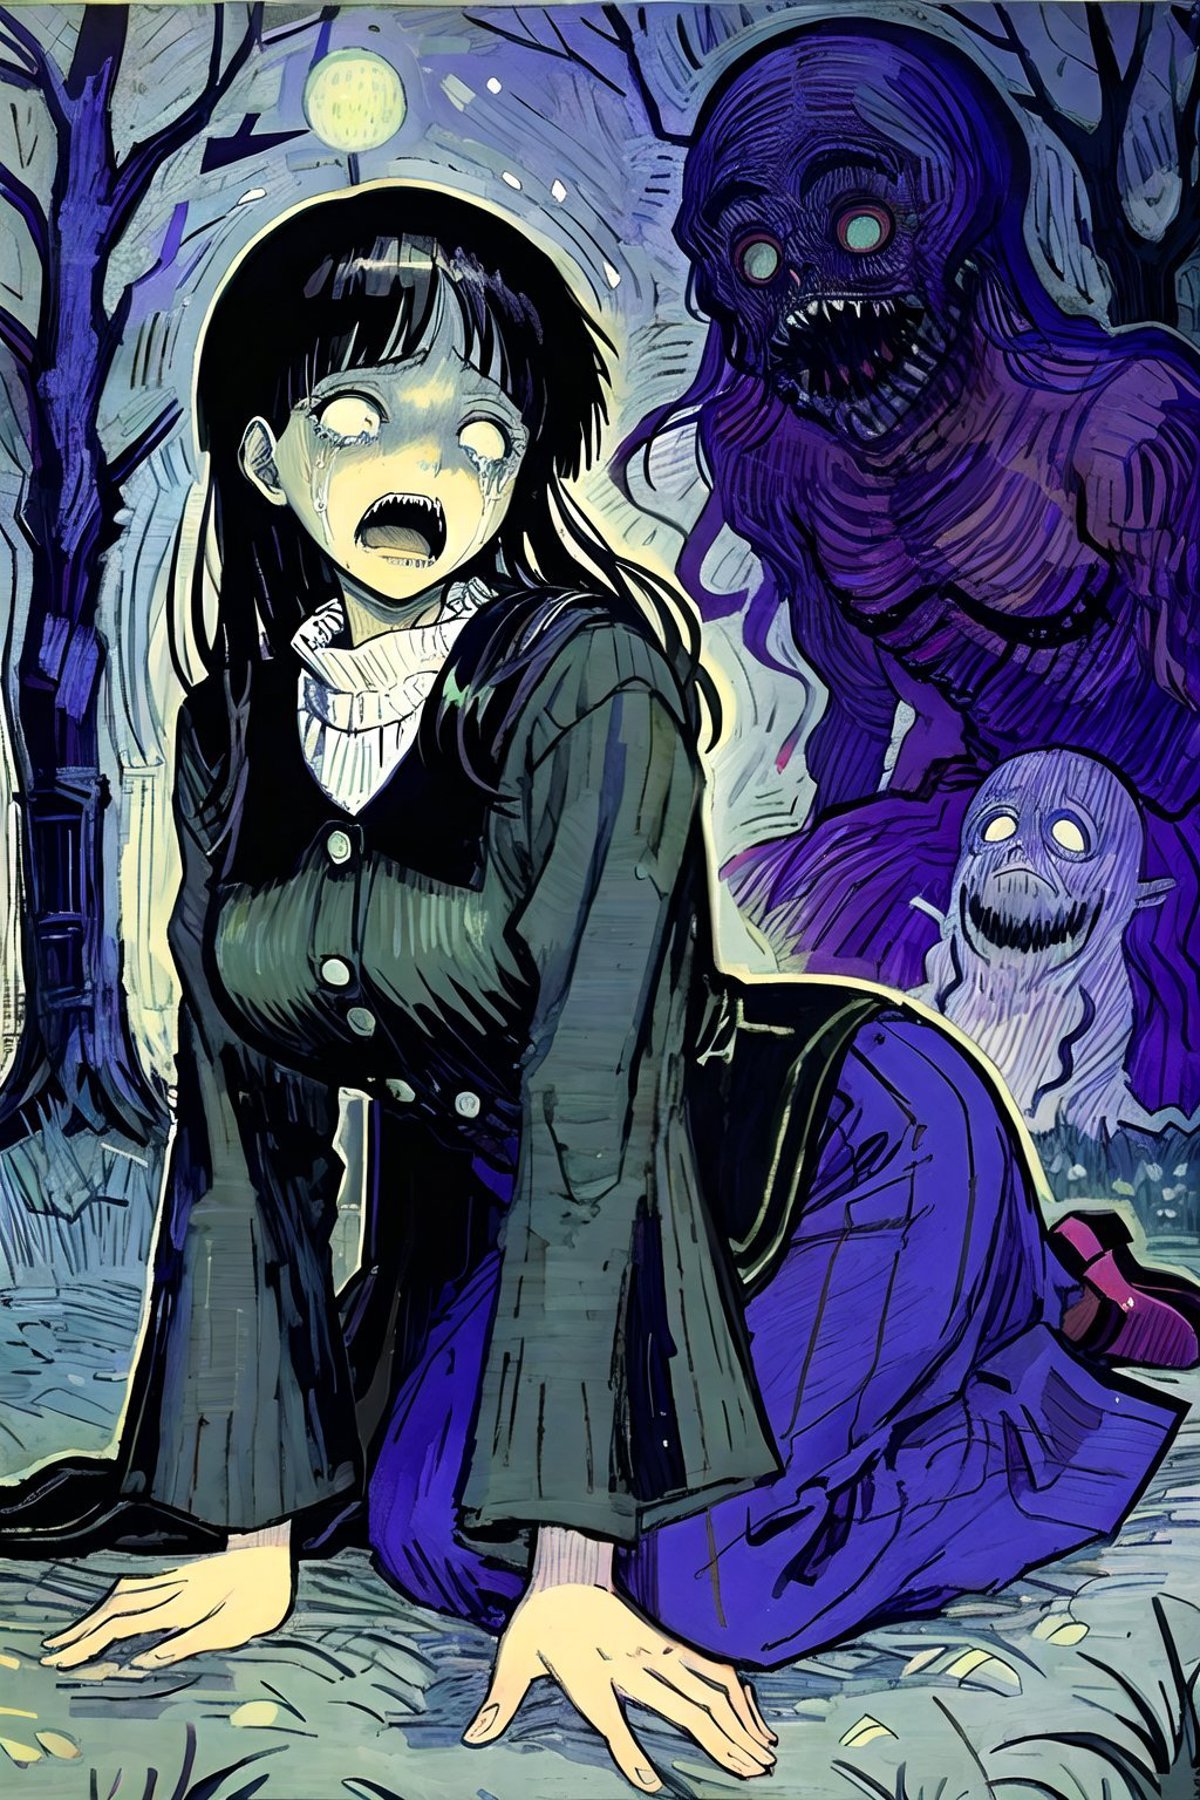 A woman in a black and white shirt is surrounded by strange, scary monsters.